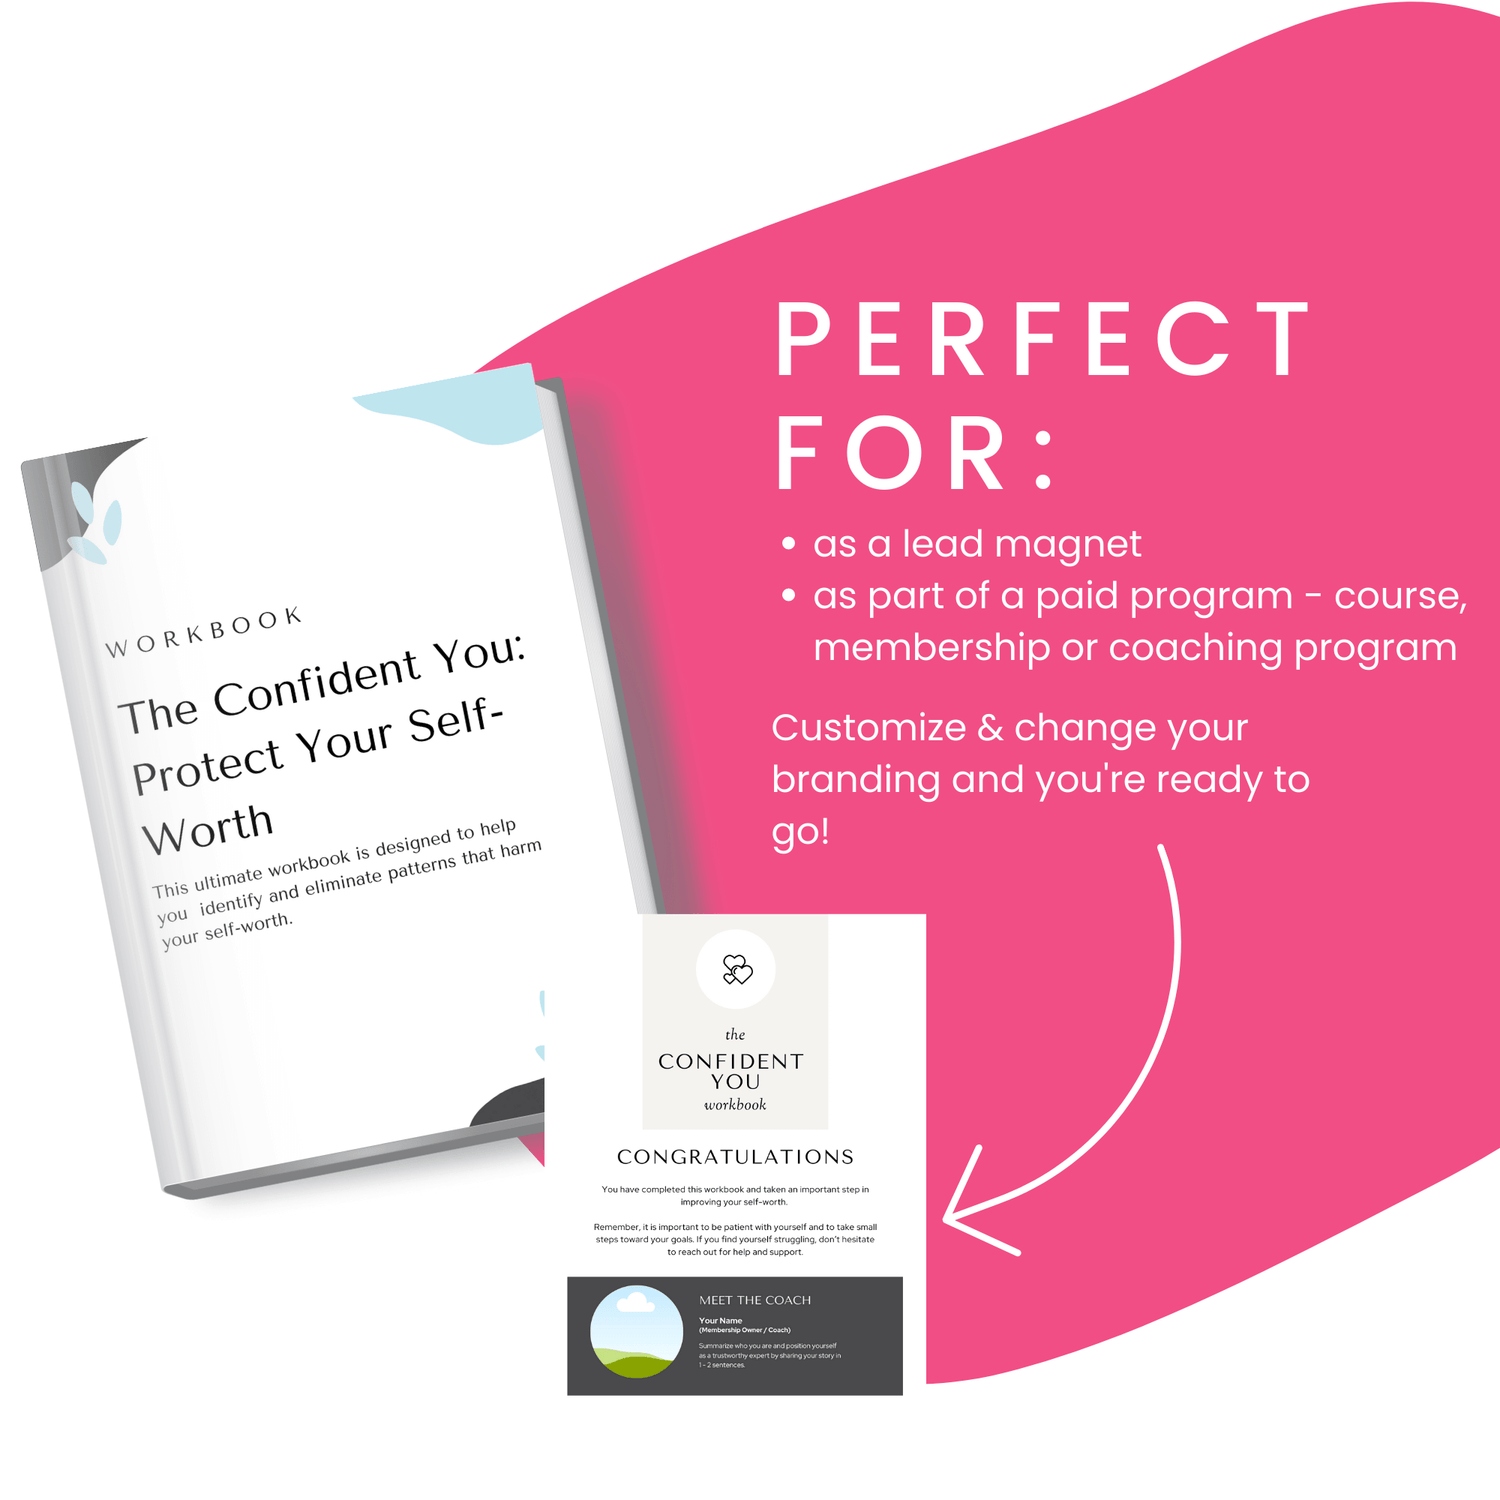 The_Confident_You_Protect_Your_Self_Worth_Workbook_Perfect_For_Lead_Magnet _And_Paid_Program